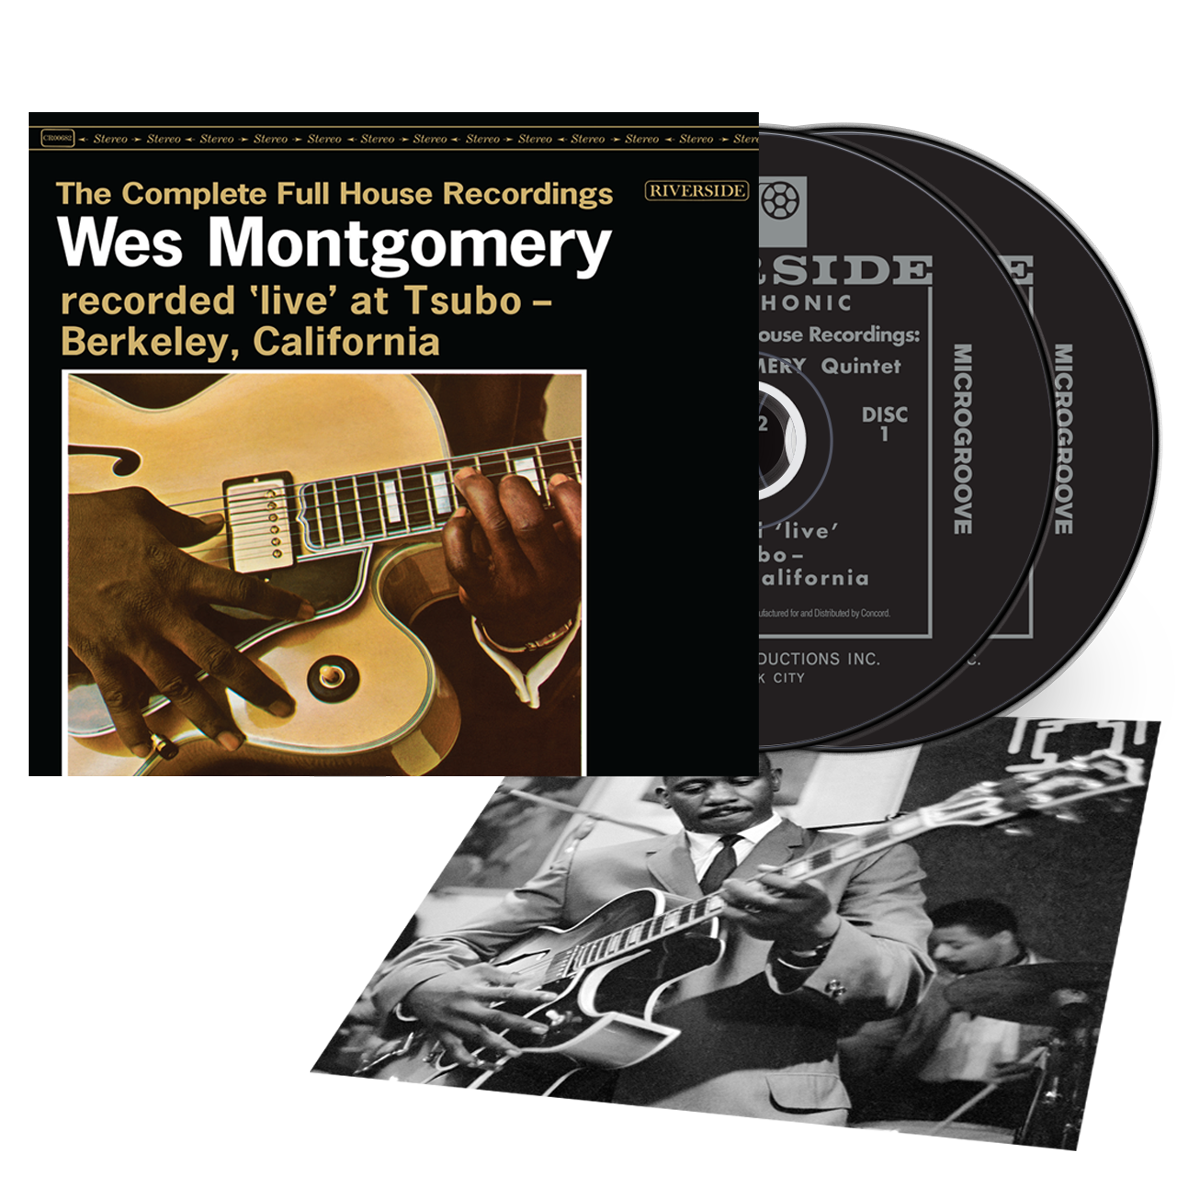 The Complete Full House Recordings | Wes Montgomery